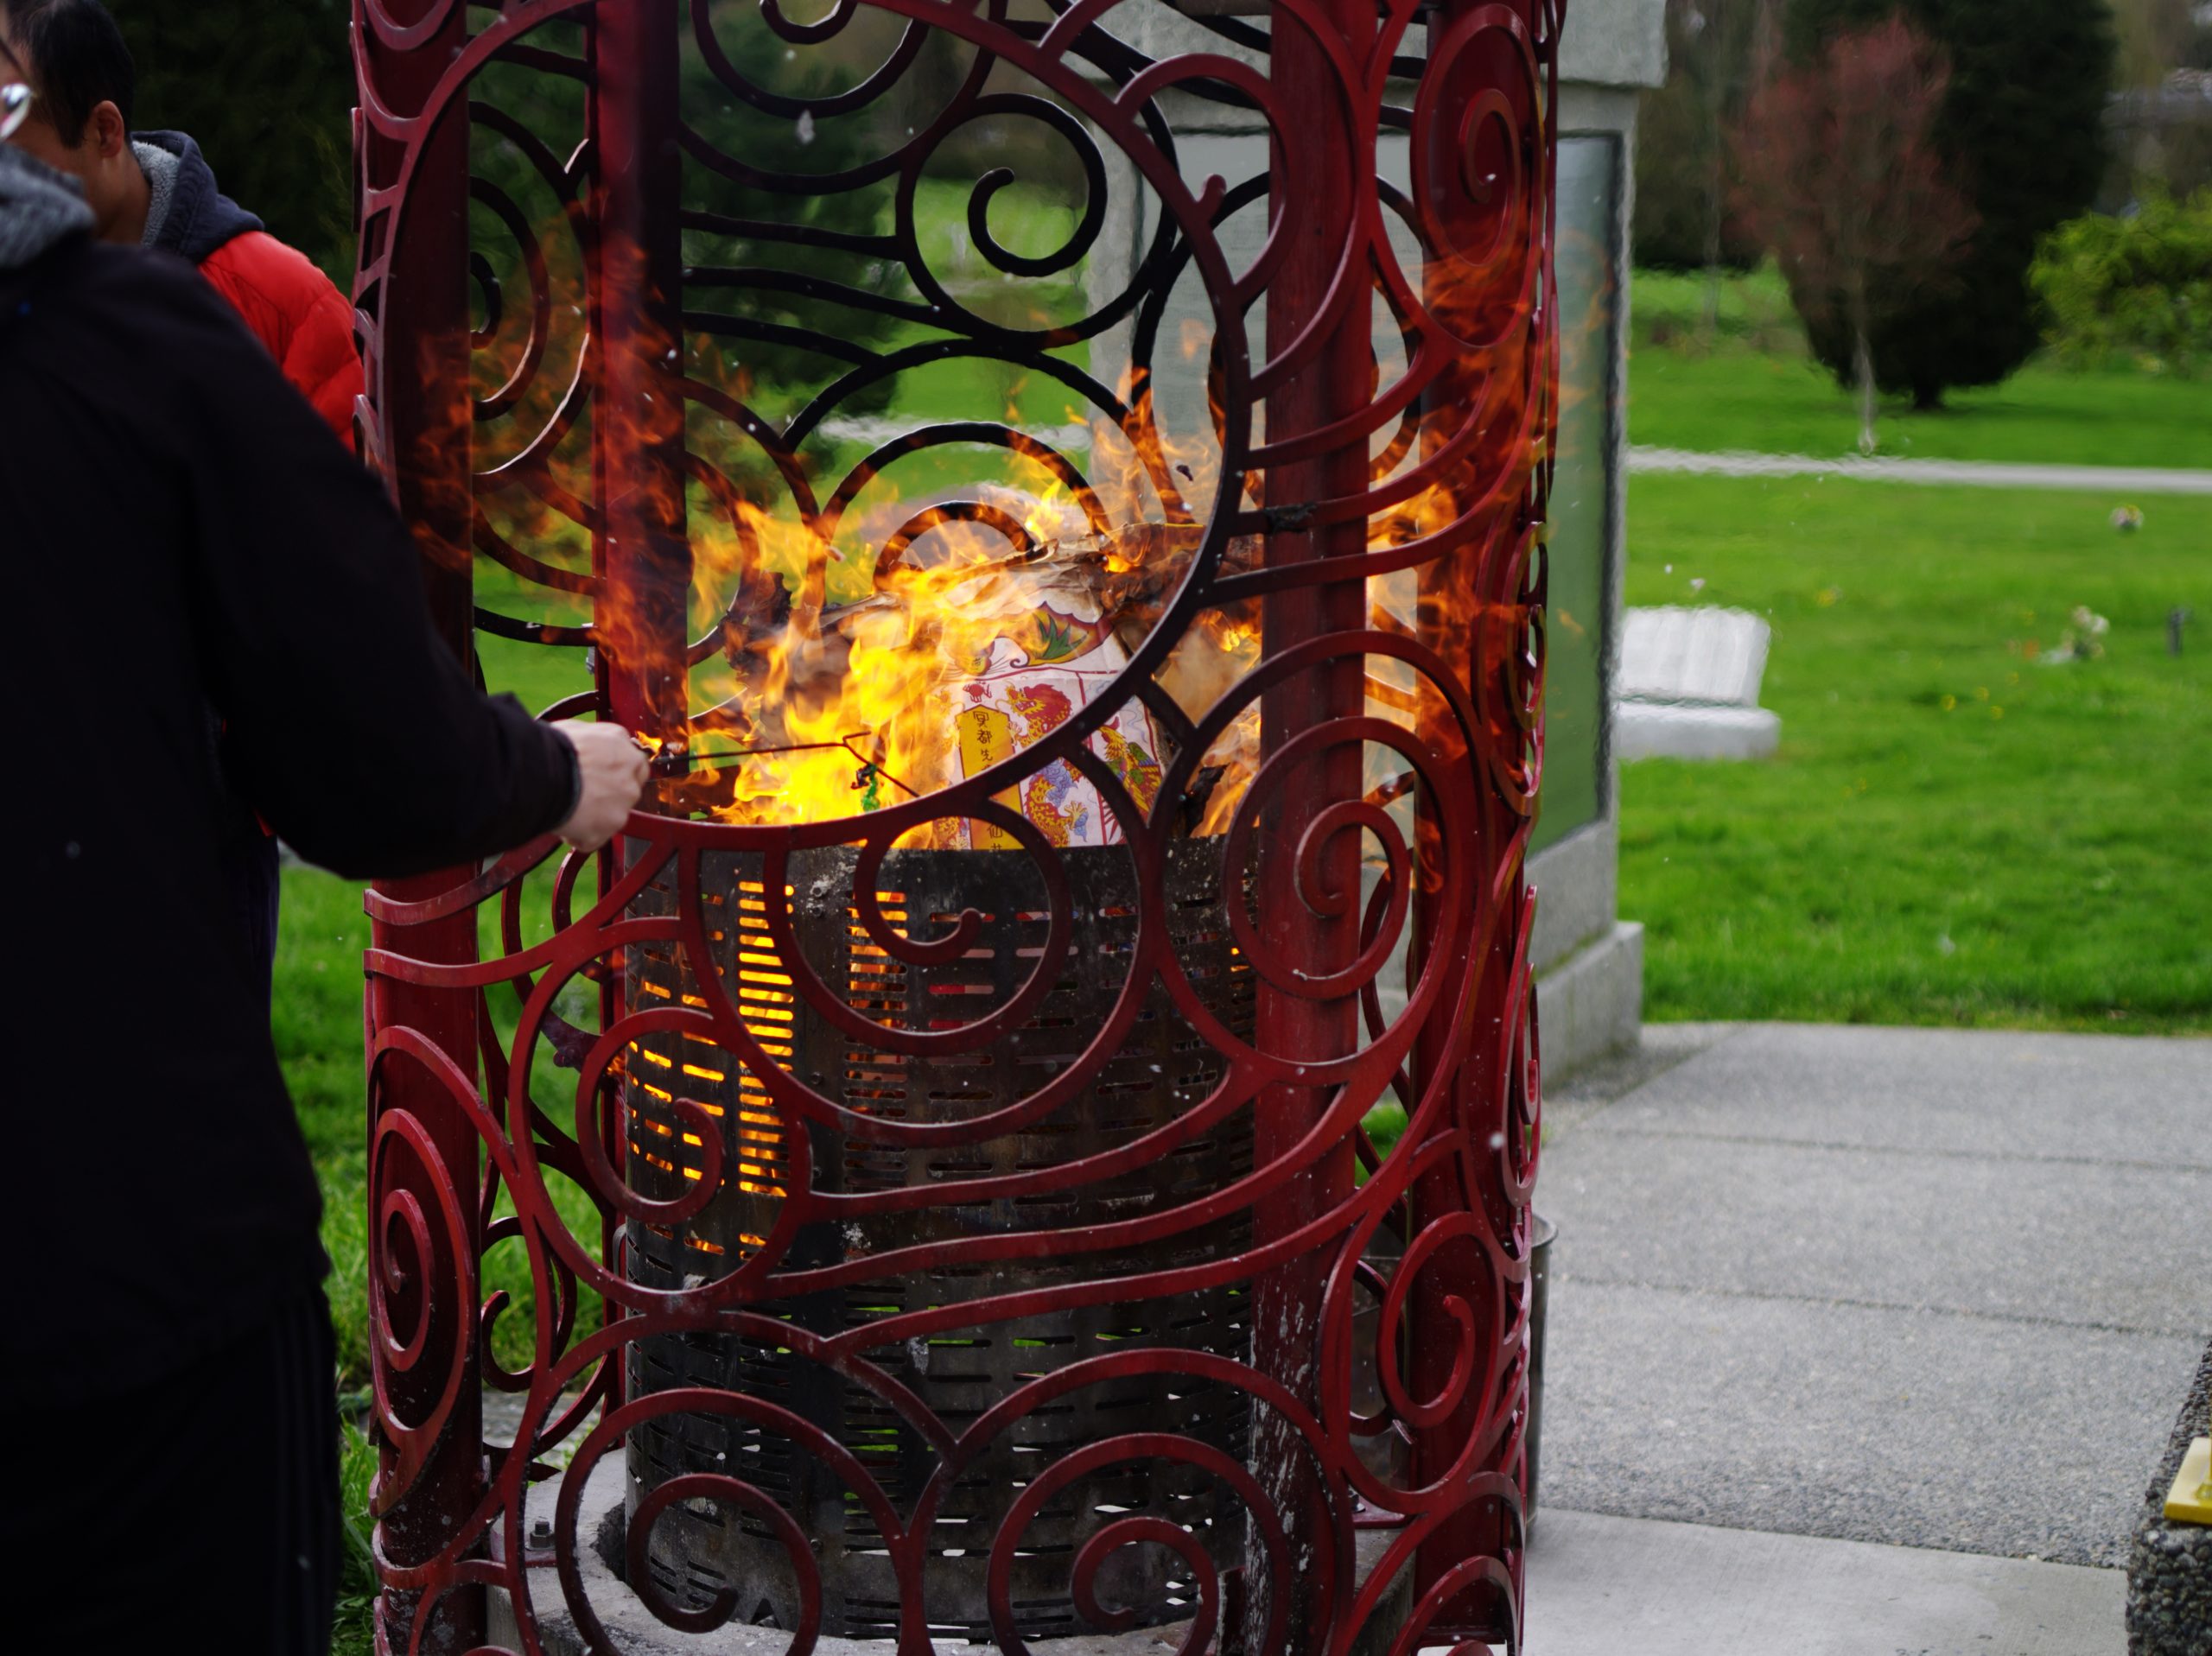 Image Description: A person’s right arm repositions materials with a long thin wire tool inside a fire in the funerary burner at the Chinese Pavilion at Mountain View Cemetery. A decorated paper commemoration is being turned to ash by the heat and the flames. Smoke and ash float above the fire, while waves of heat distort the surrounding image of the photograph. Flames are visible above and through the metal grate that safely holds the offerings provided by community members.